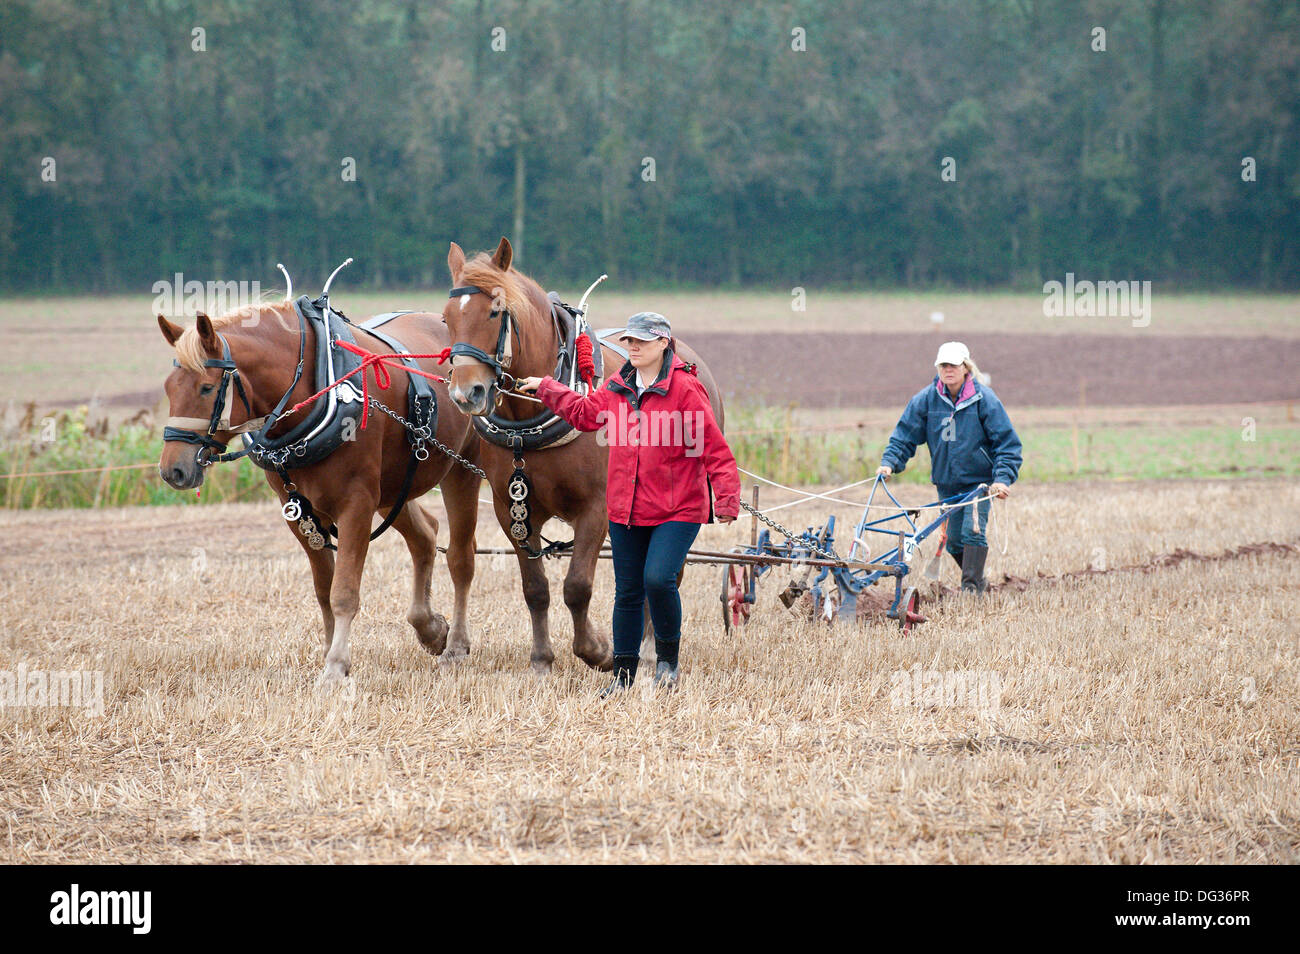 Llanwarne, Herefordshire, UK. 13th October 2013. Contestants take part in the Horse Ploughing - Oat Seed Furrow Work Class. More than 230 top British ploughmen compete in the 2013 British National Ploughing Championships which have returned to Herefordshire for the first time in 27 years. The top ploughmen of  each class (reversible and conventional) will represent Britain at the World Ploughing Championships to be held in France in 2014. Photo credit: Graham M. Lawrence/Alamy Live News. Stock Photo